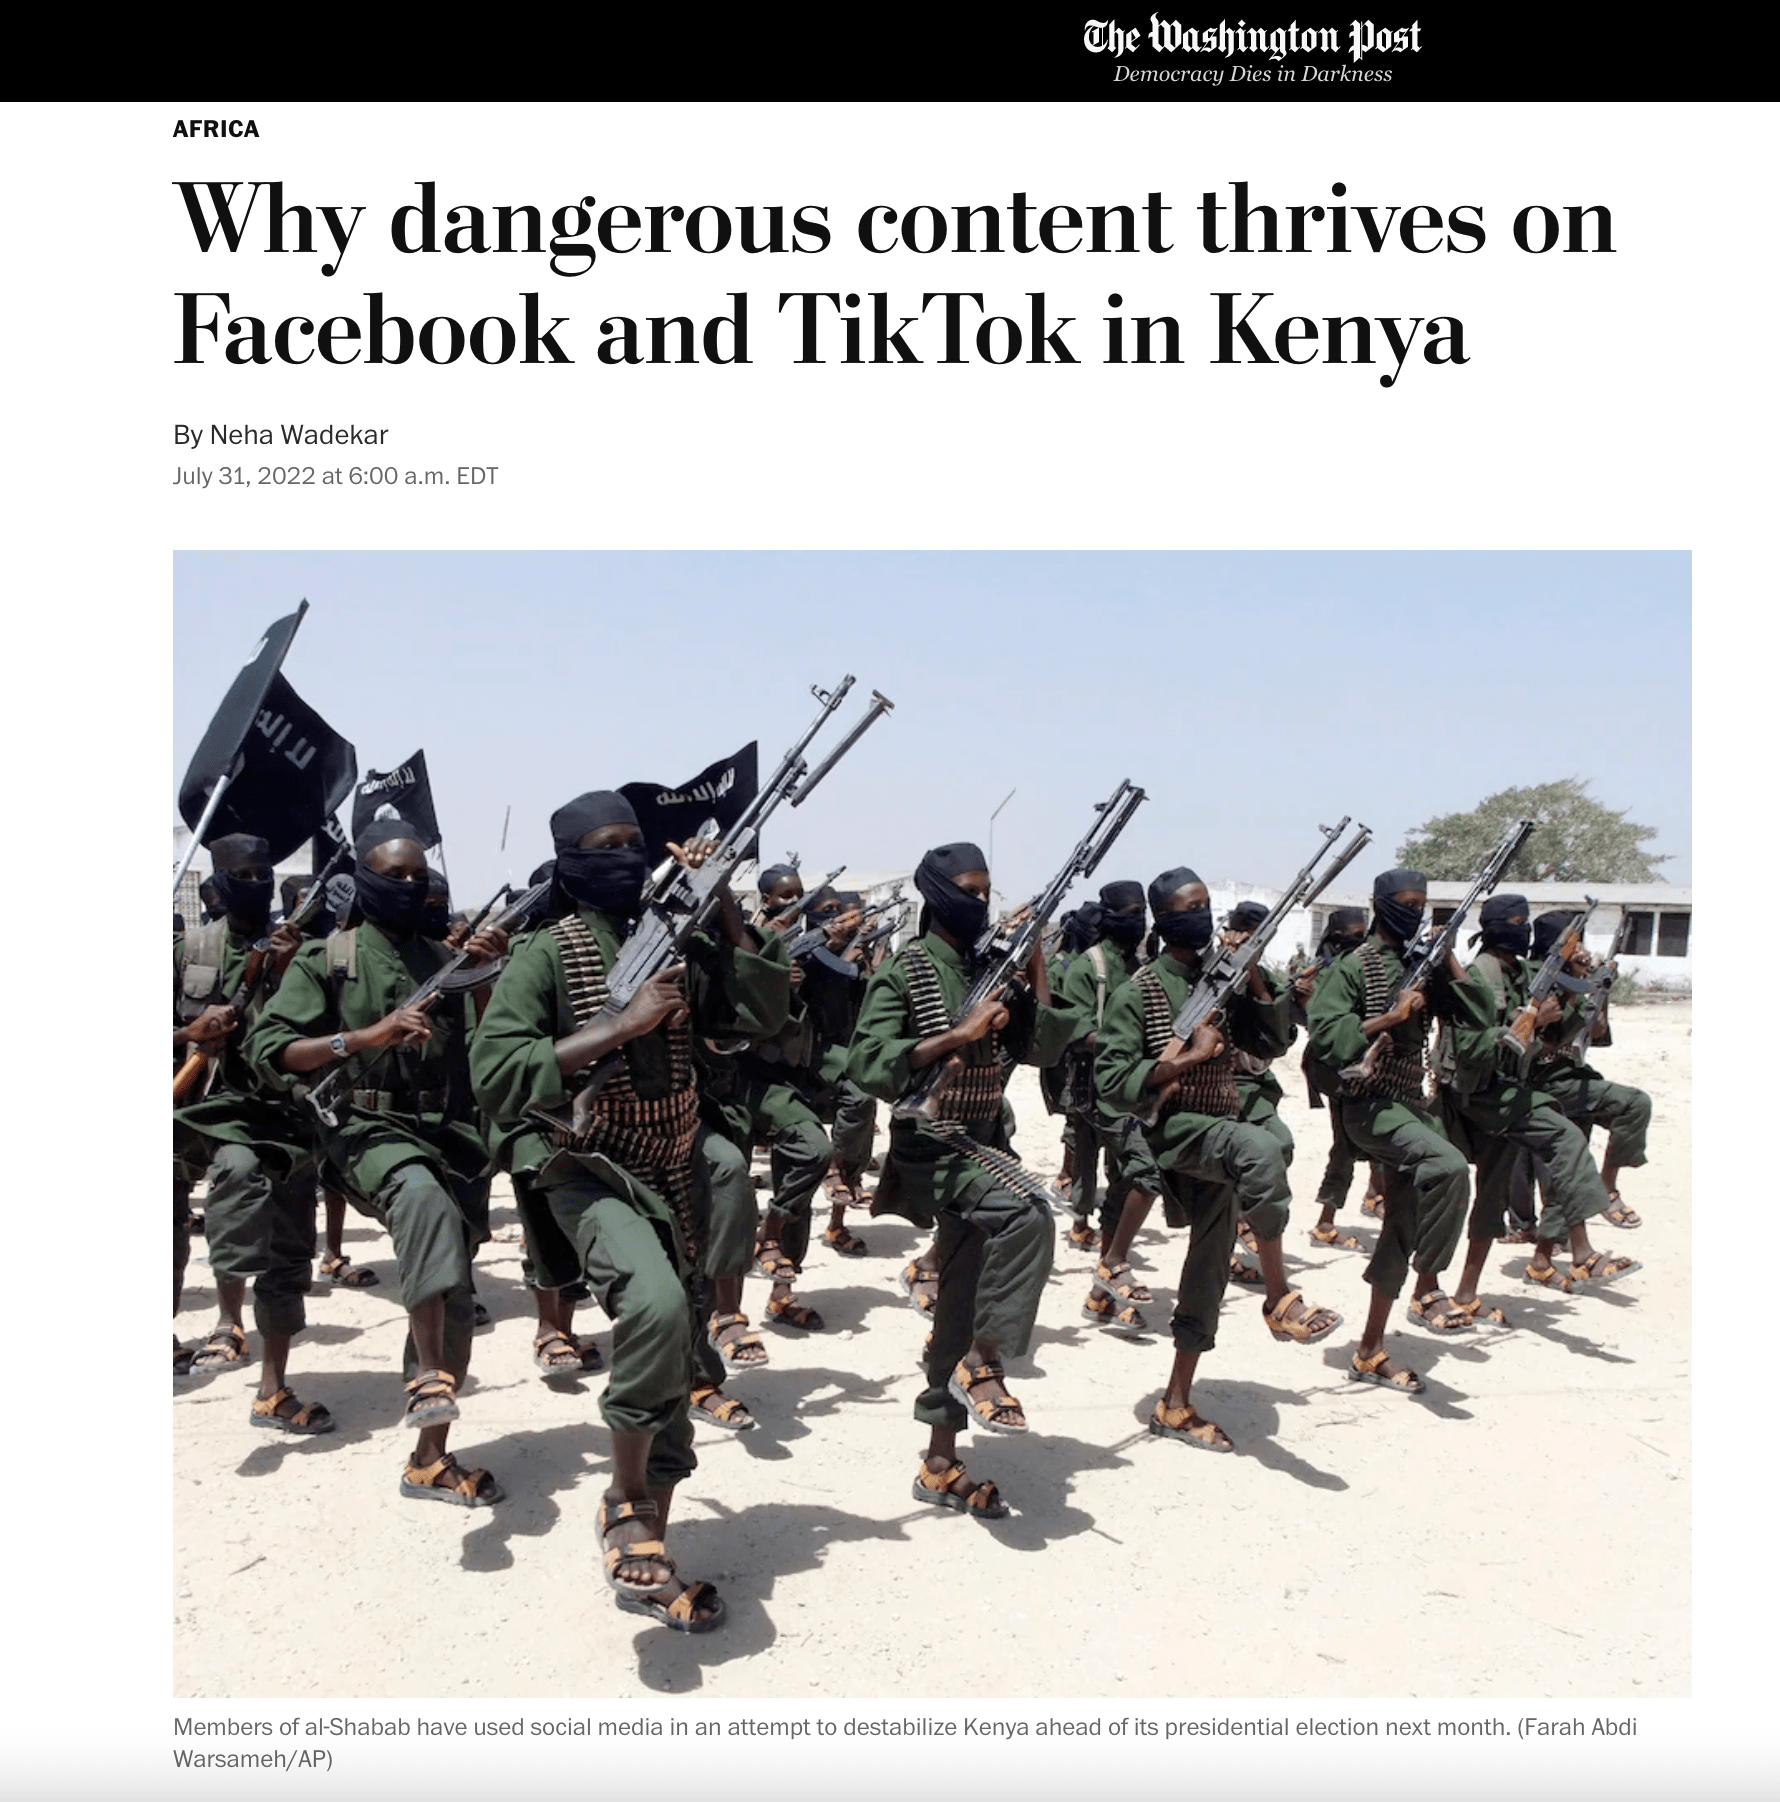 Why dangerous content thrives on Facebook and TikTok in Kenya – The Washington Post (image)